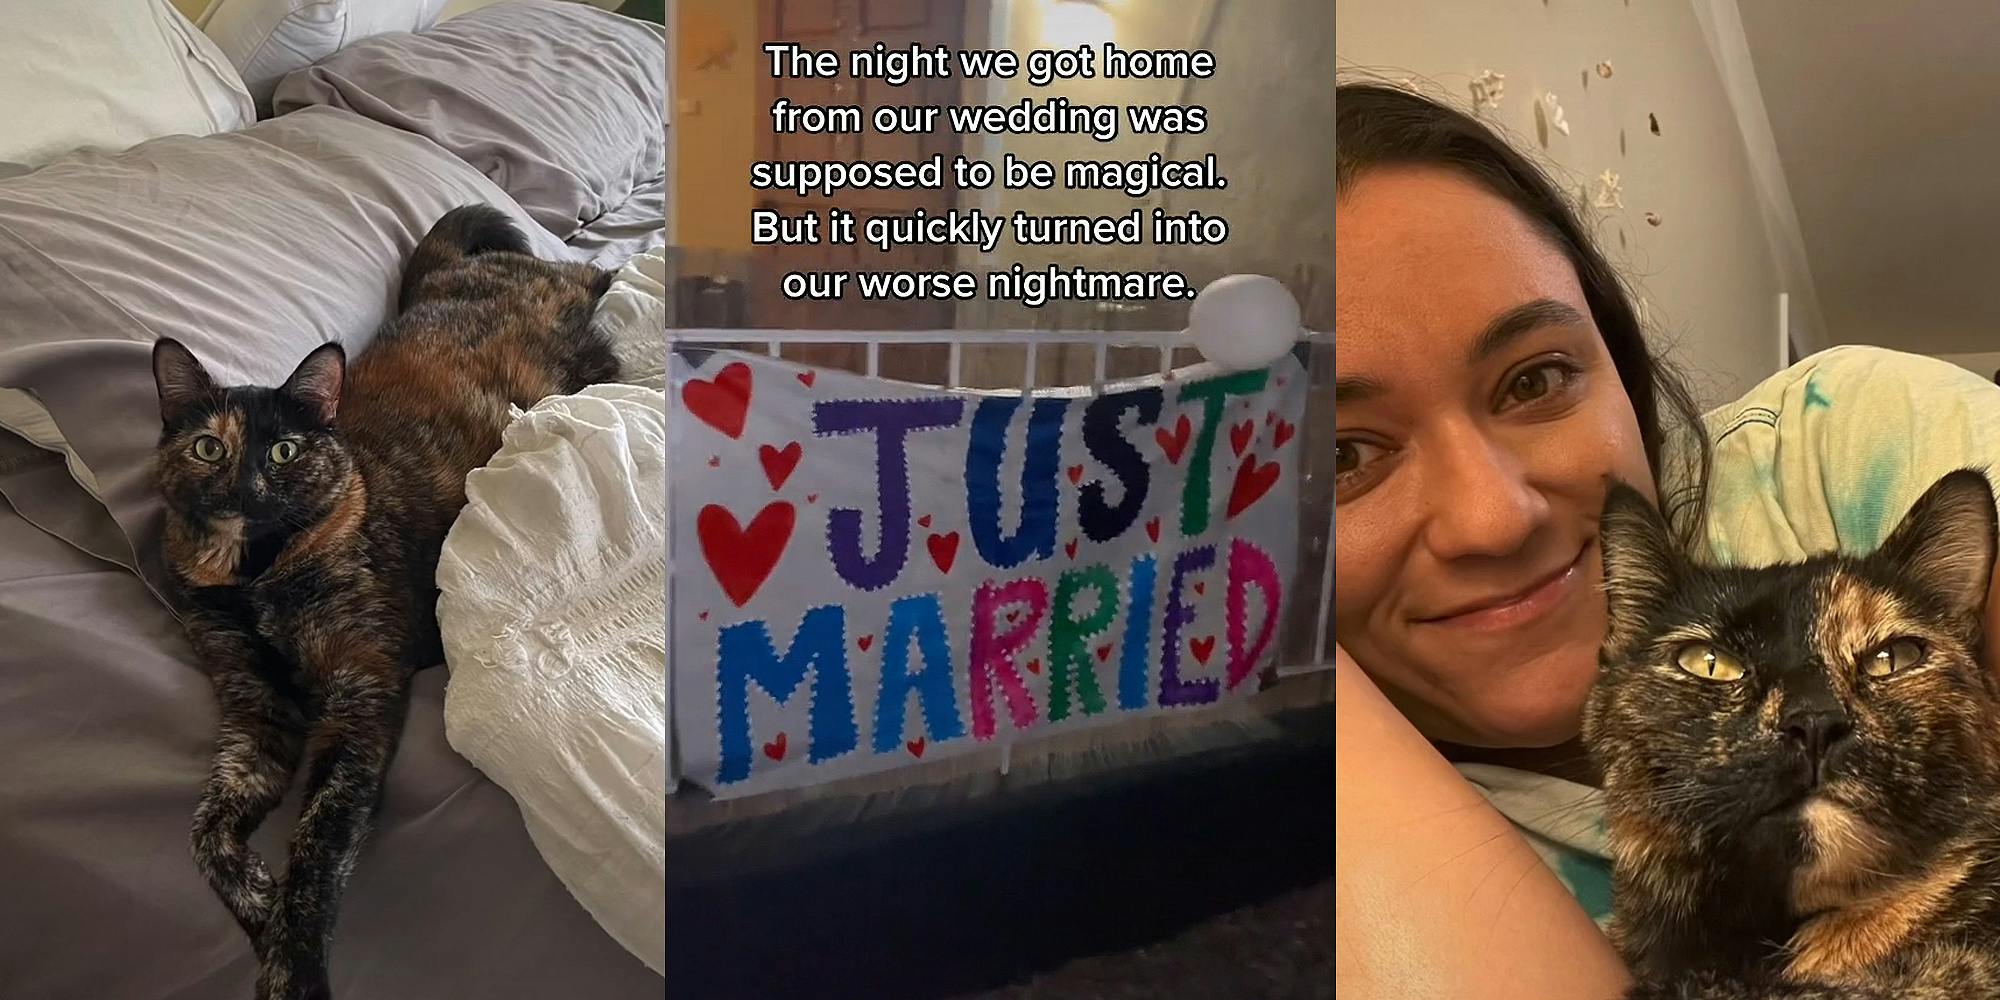 Cat laying on bed (l) House porch with "Just Married" sign hung on railing caption "The night we got home from our wedding was supposed to be magical. But it quickly turned into our worst nightmare" (c) Woman cuddling cat on bed (r)